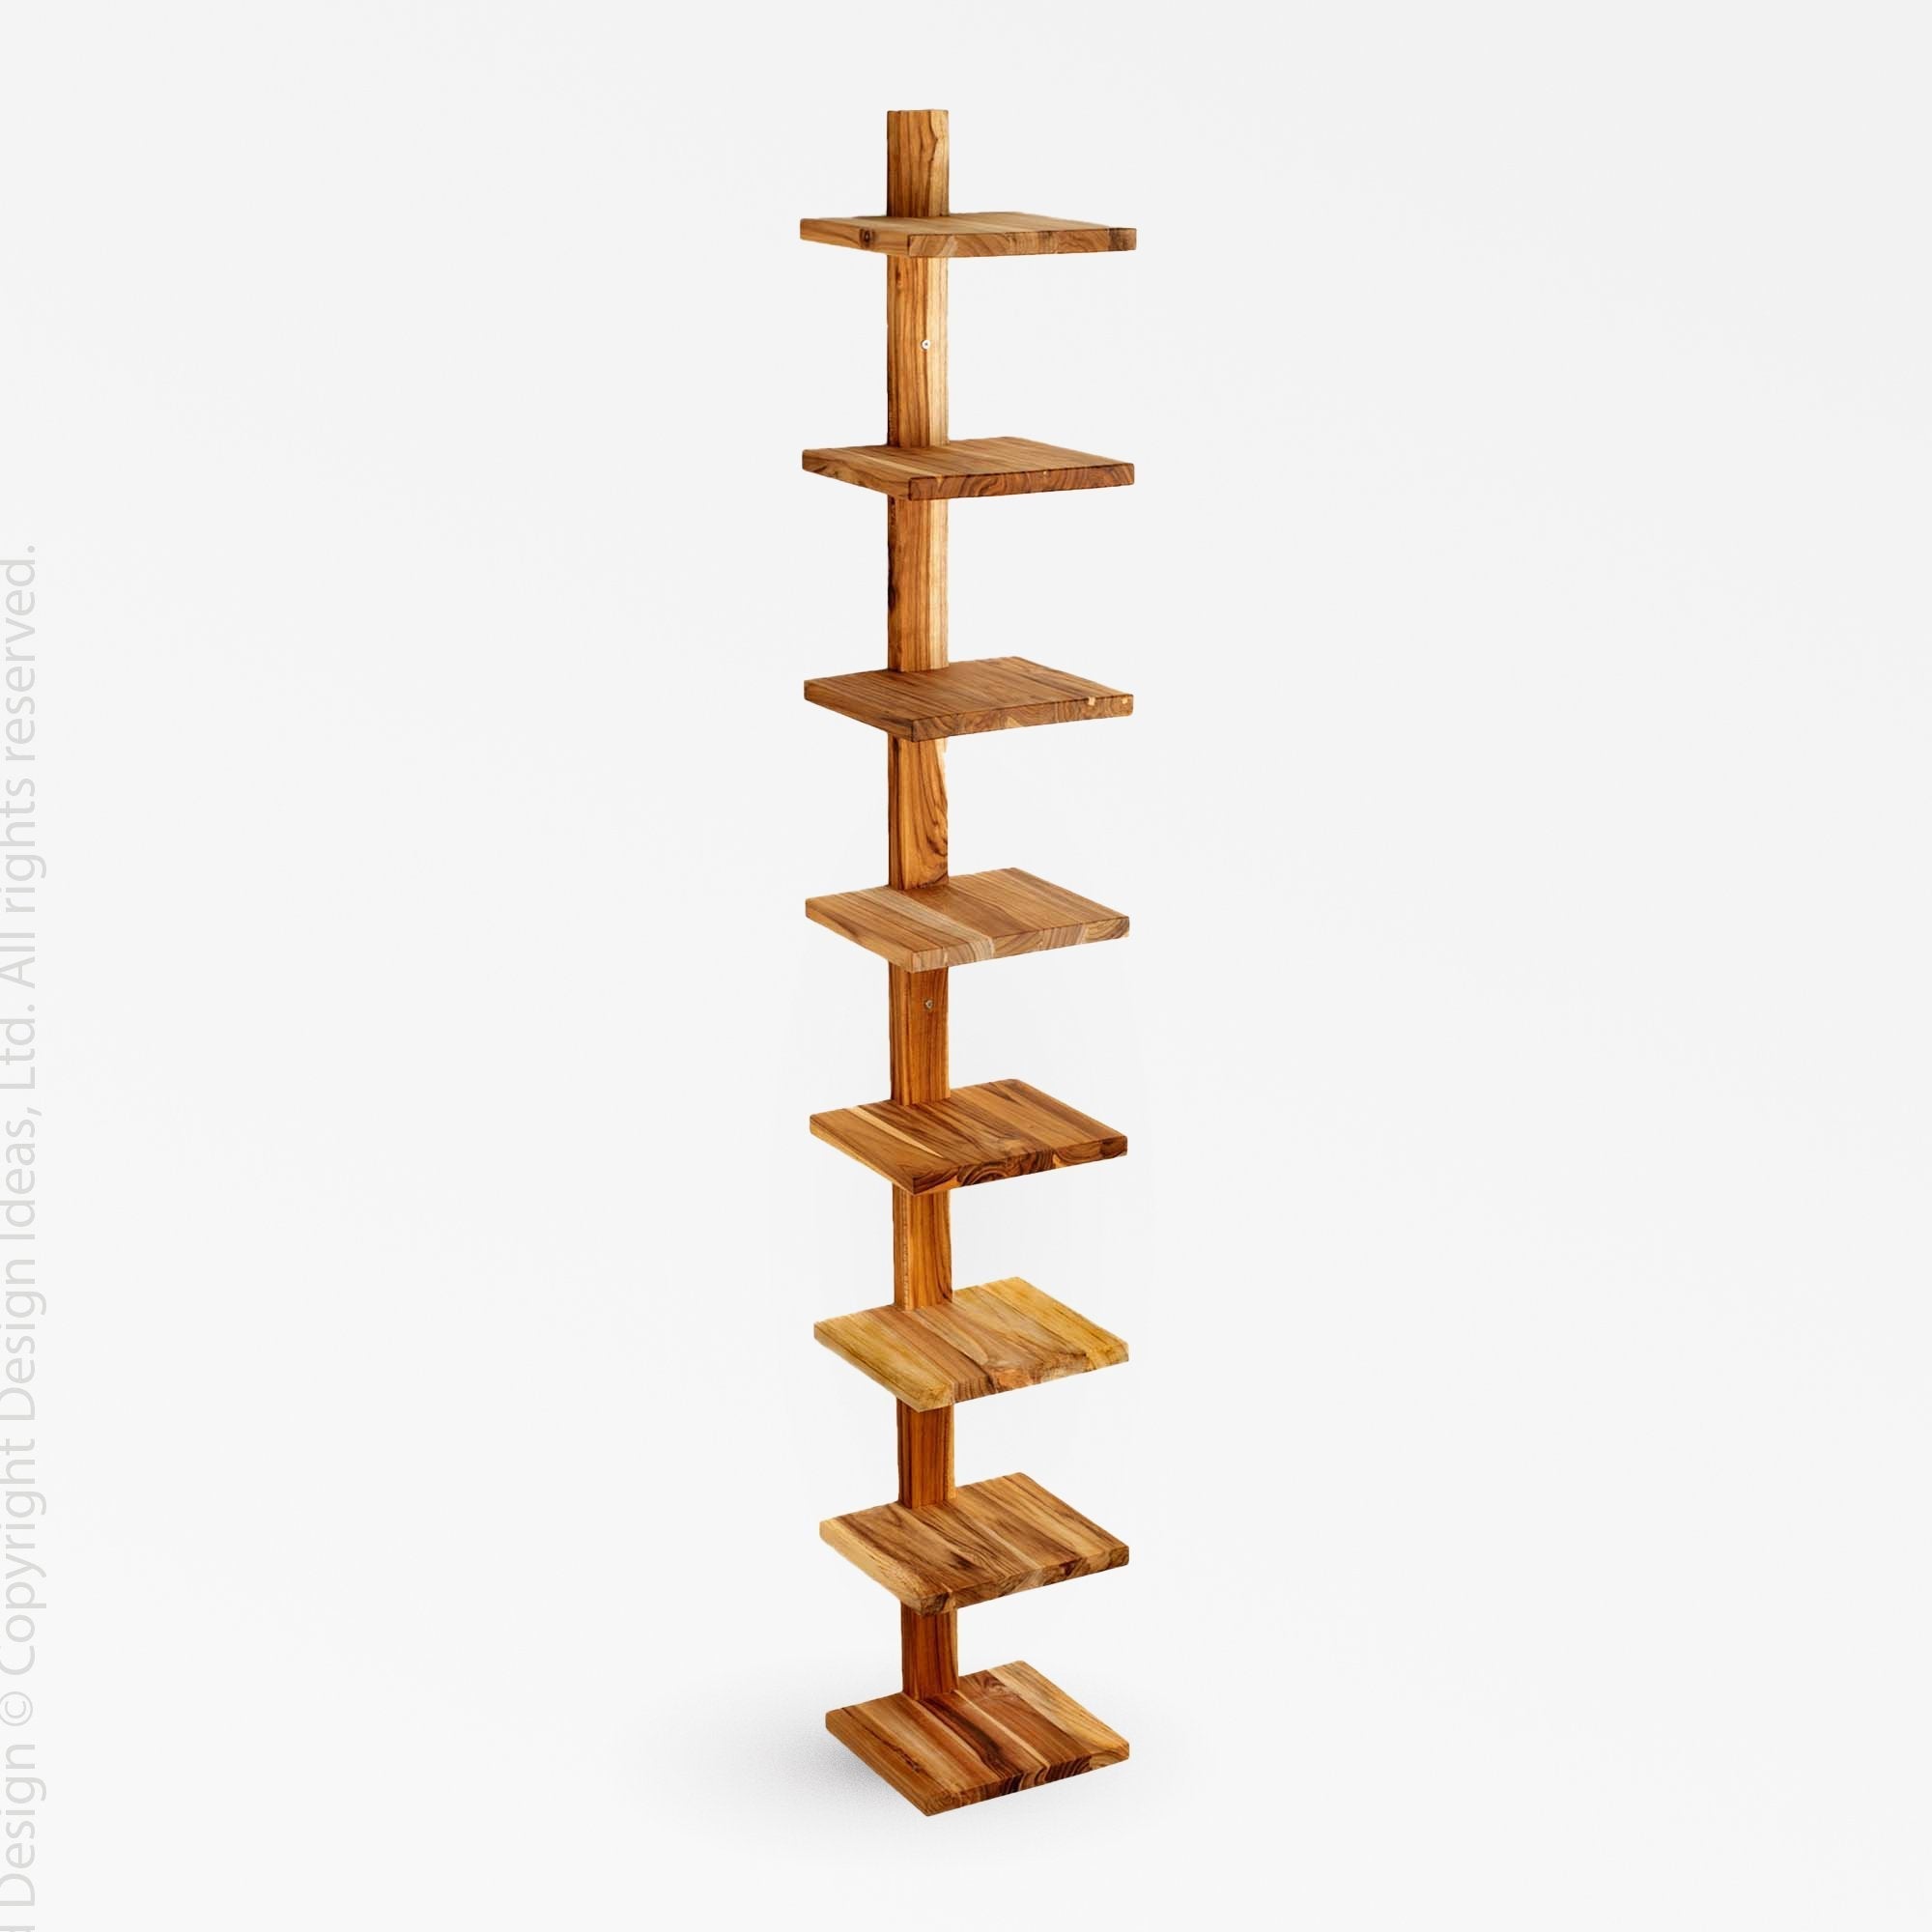 Takara Teak Column Shelf (Large) - Silver Color | Image 1 | From the Takara Collection | Elegantly made with solid teak for long lasting use | This shelf is sustainably sourced | Available in natural color | texxture home